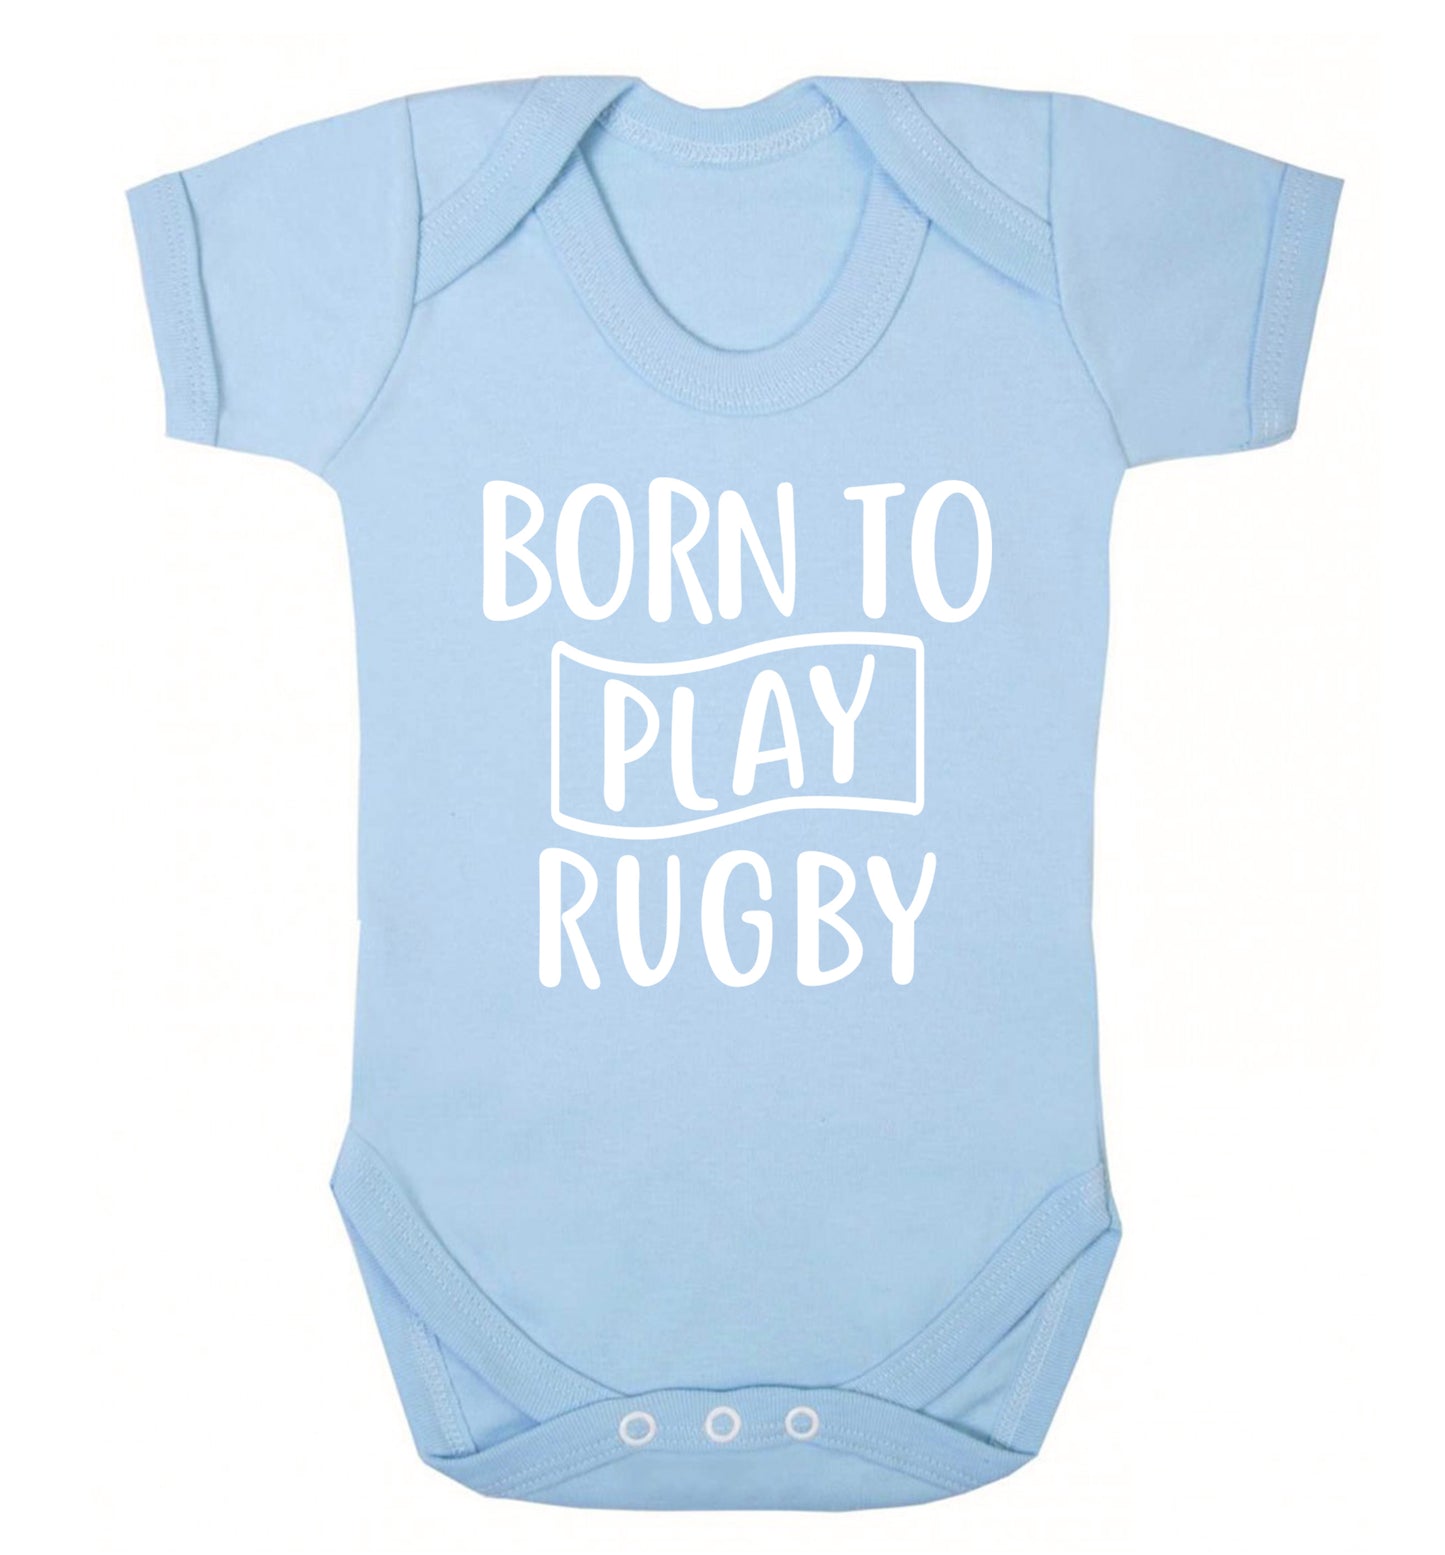 Born to play rugby Baby Vest pale blue 18-24 months